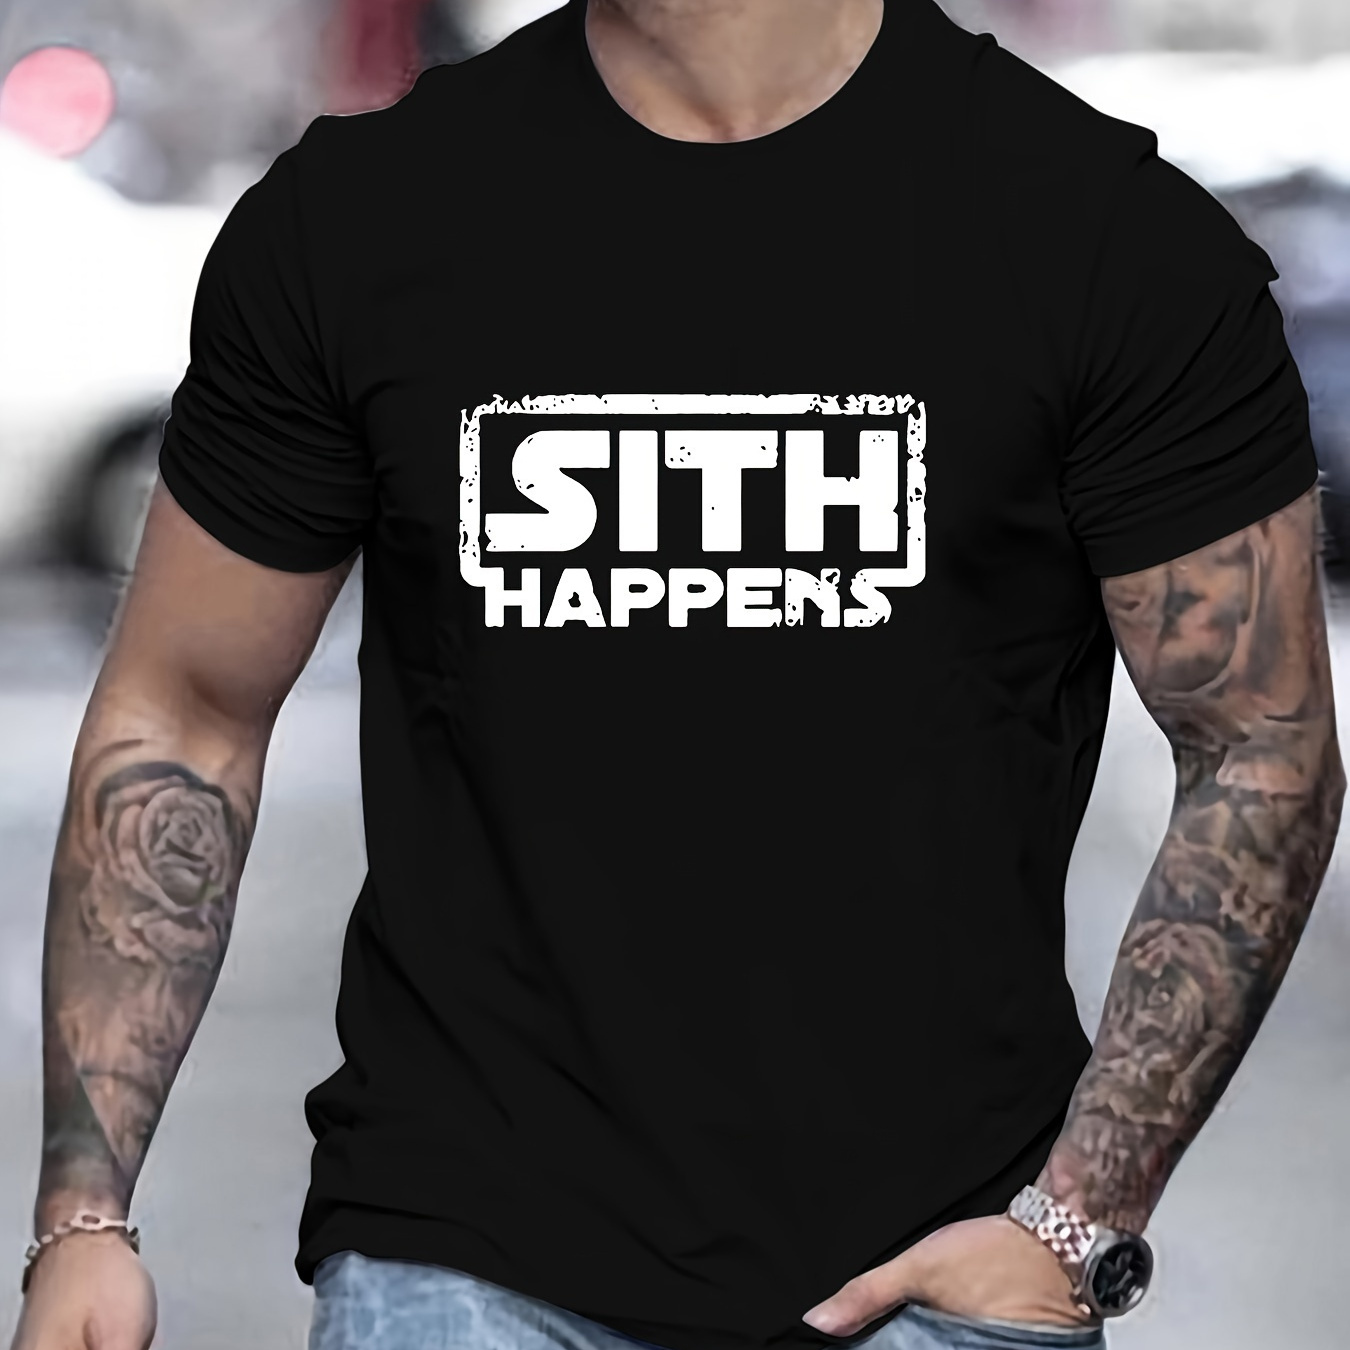 

Sith Happens Print Men's Casual T-shirt, Short Sleeve Tee Tops, Summer Outdoor Sports Clothing